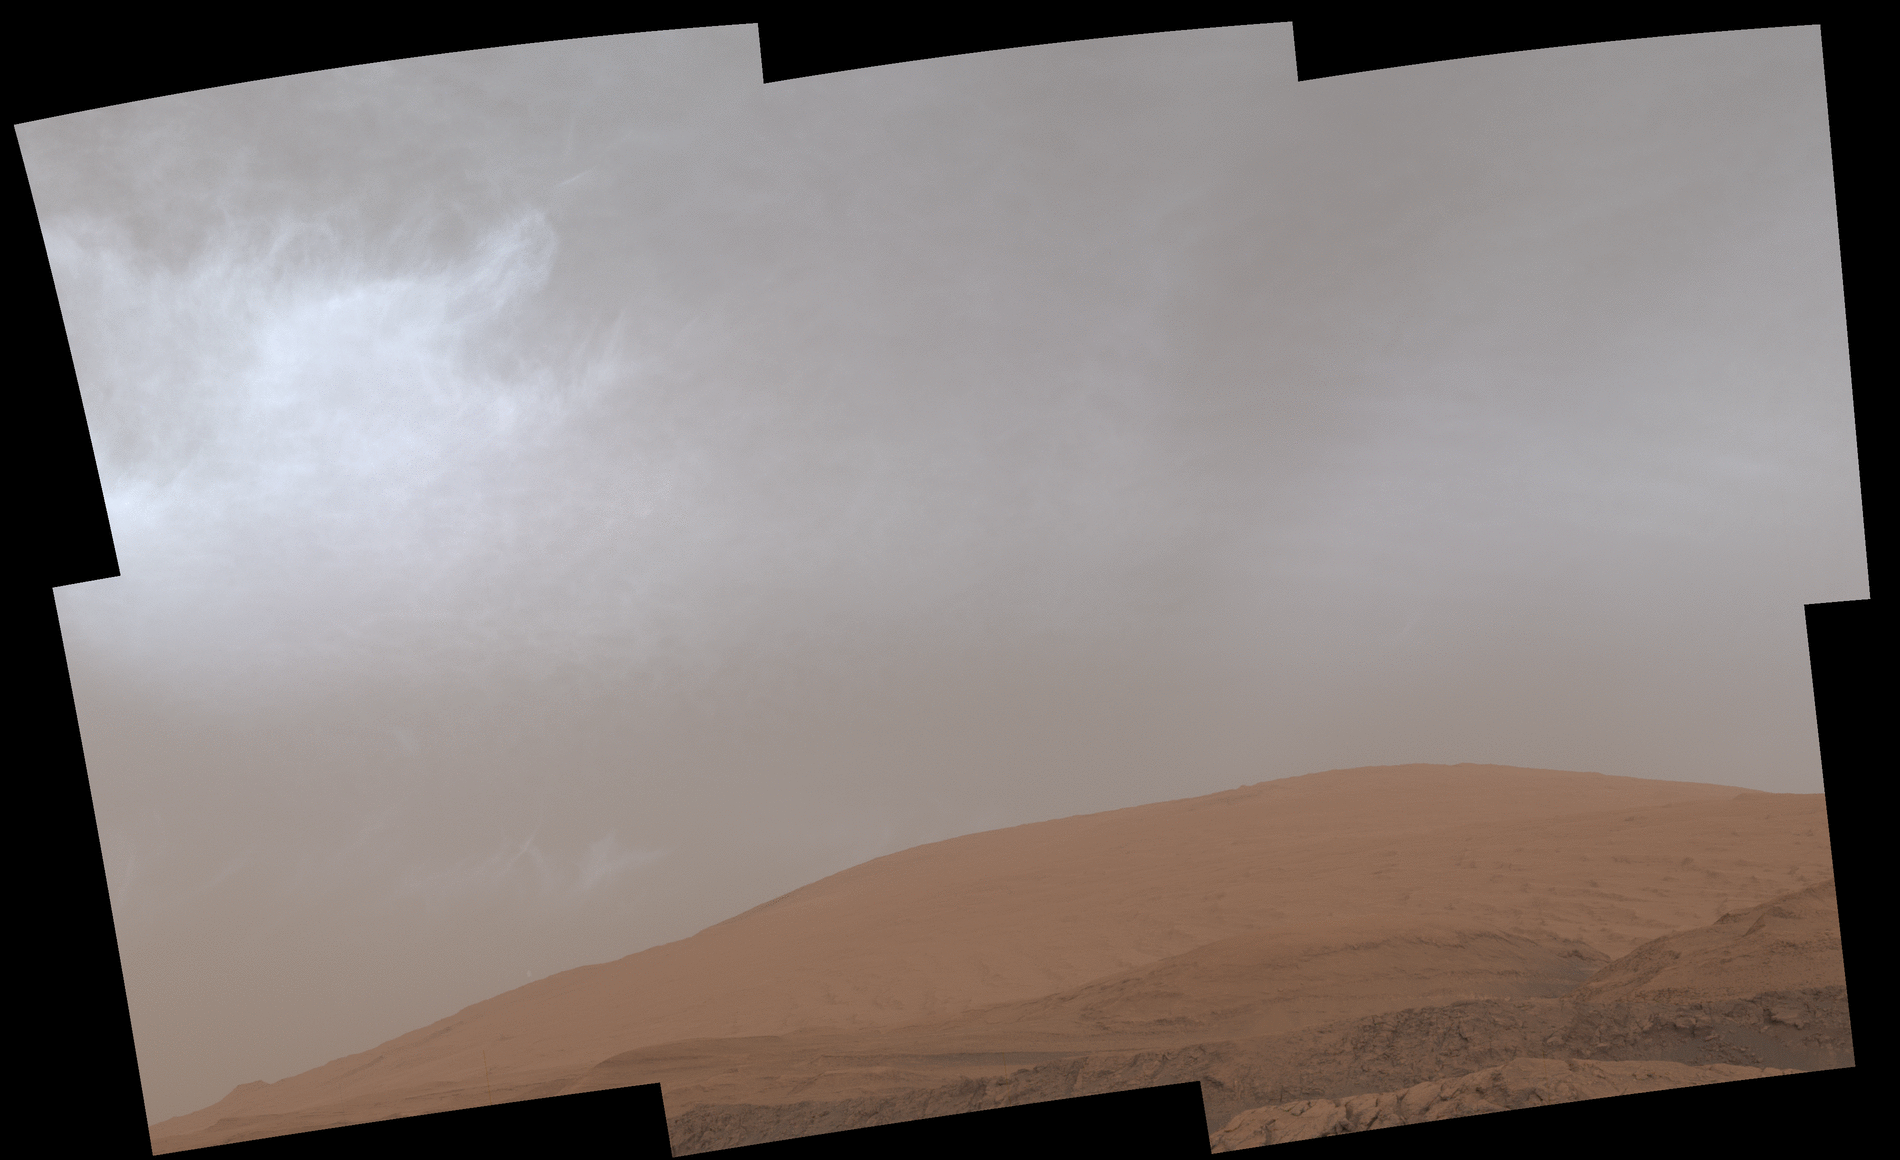 2-PIA24661-Curiosity_GIF_Shows_Drifting_Clouds_Over_Mount_Sharp MARCH19